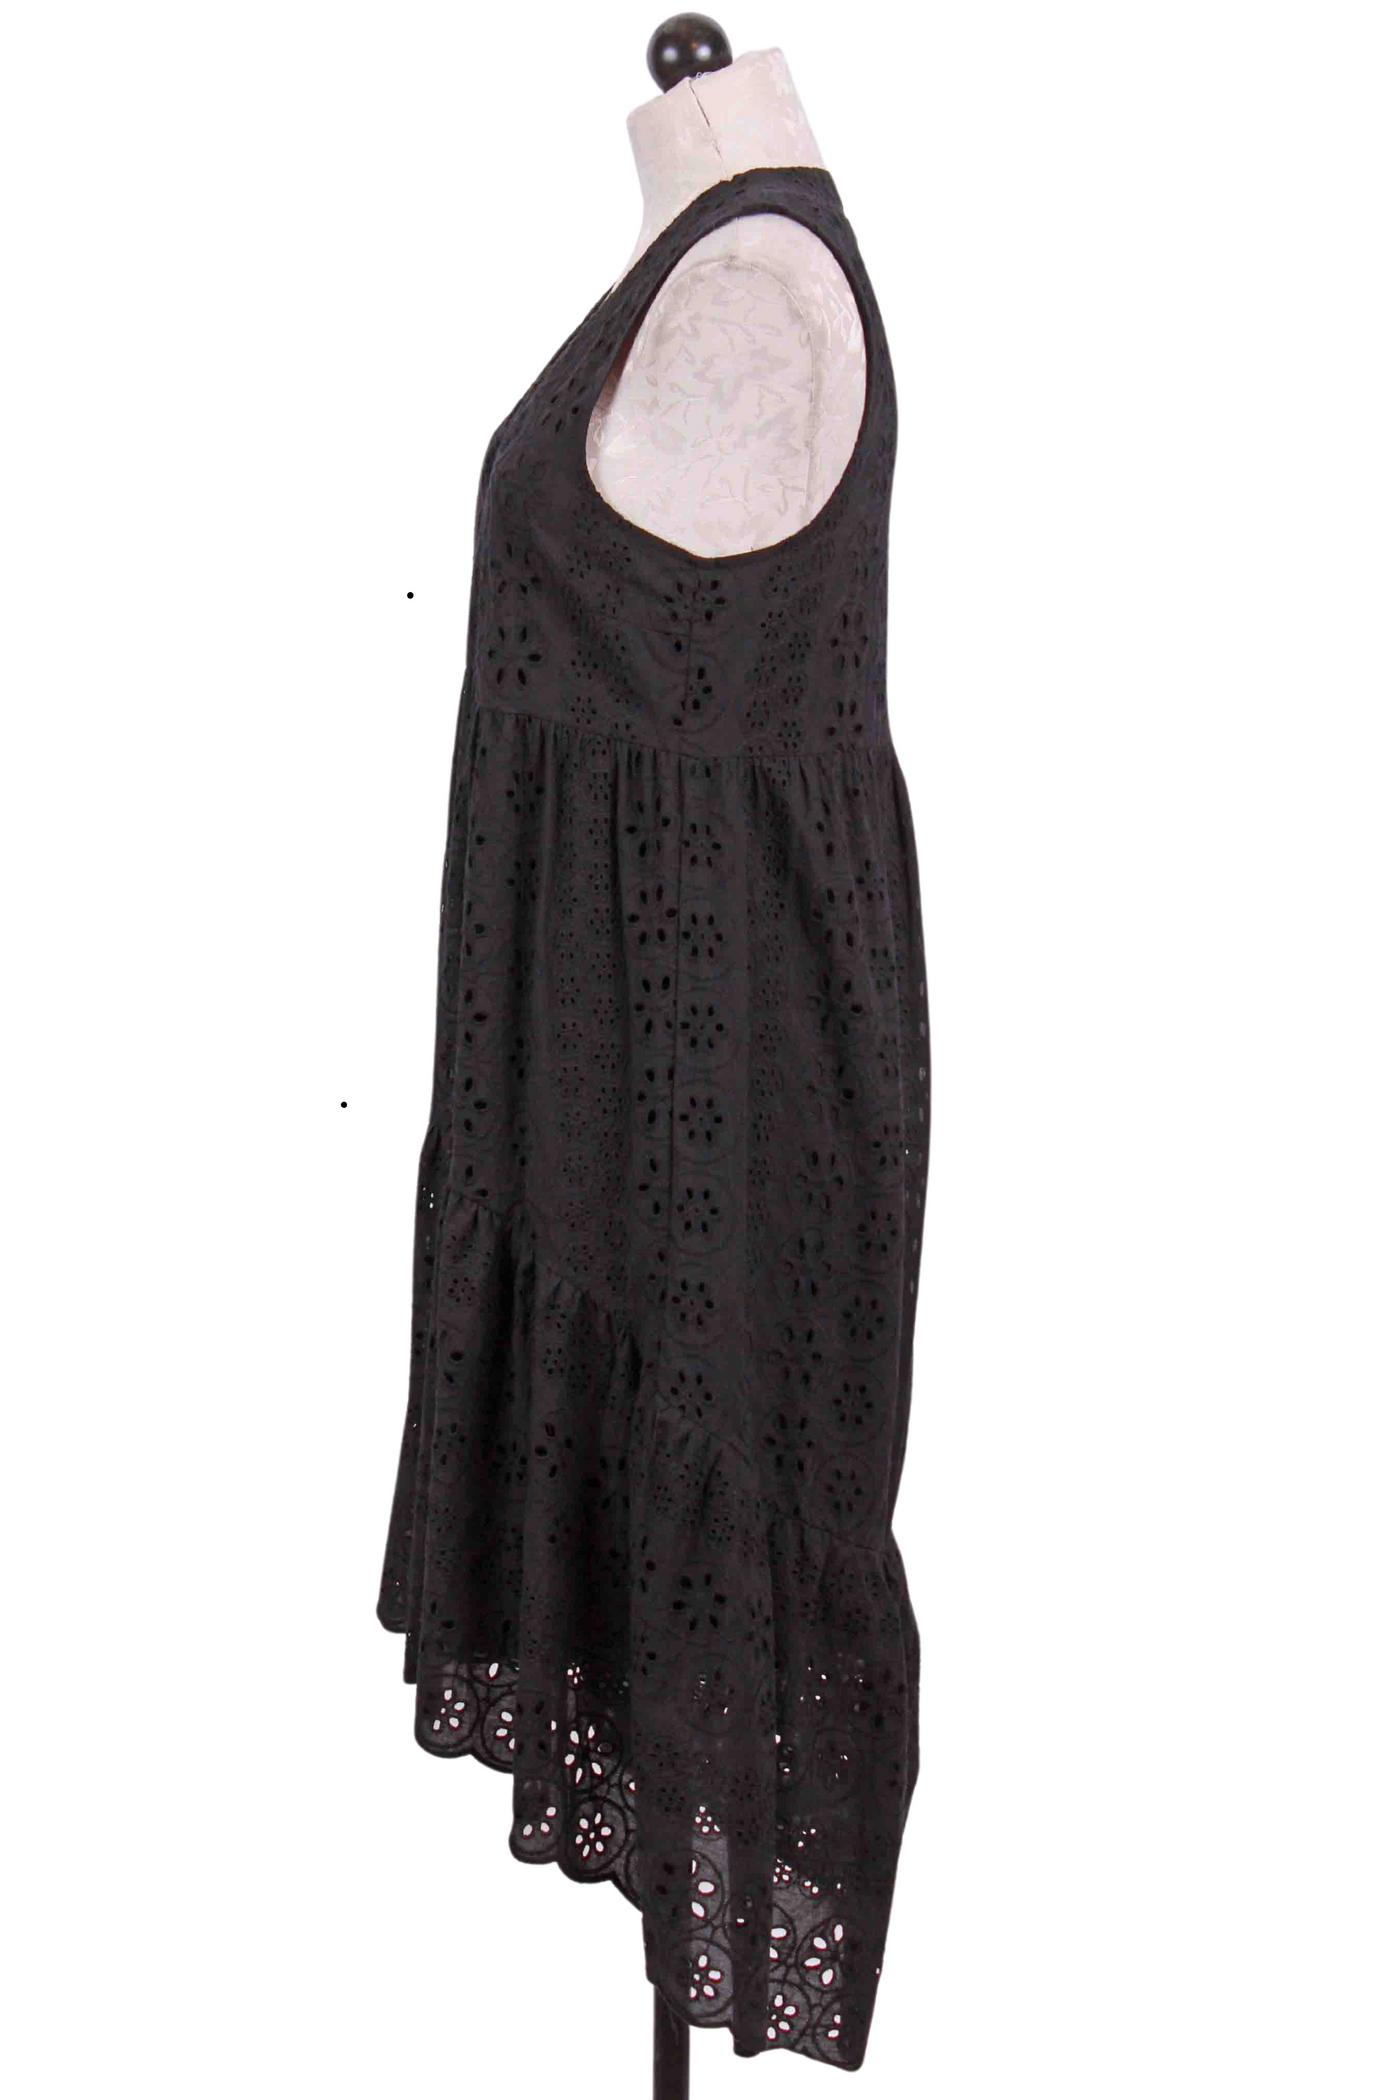 side view of black Cotton Sleeveless Tiered Eyelet V Neck Dress by Apricot